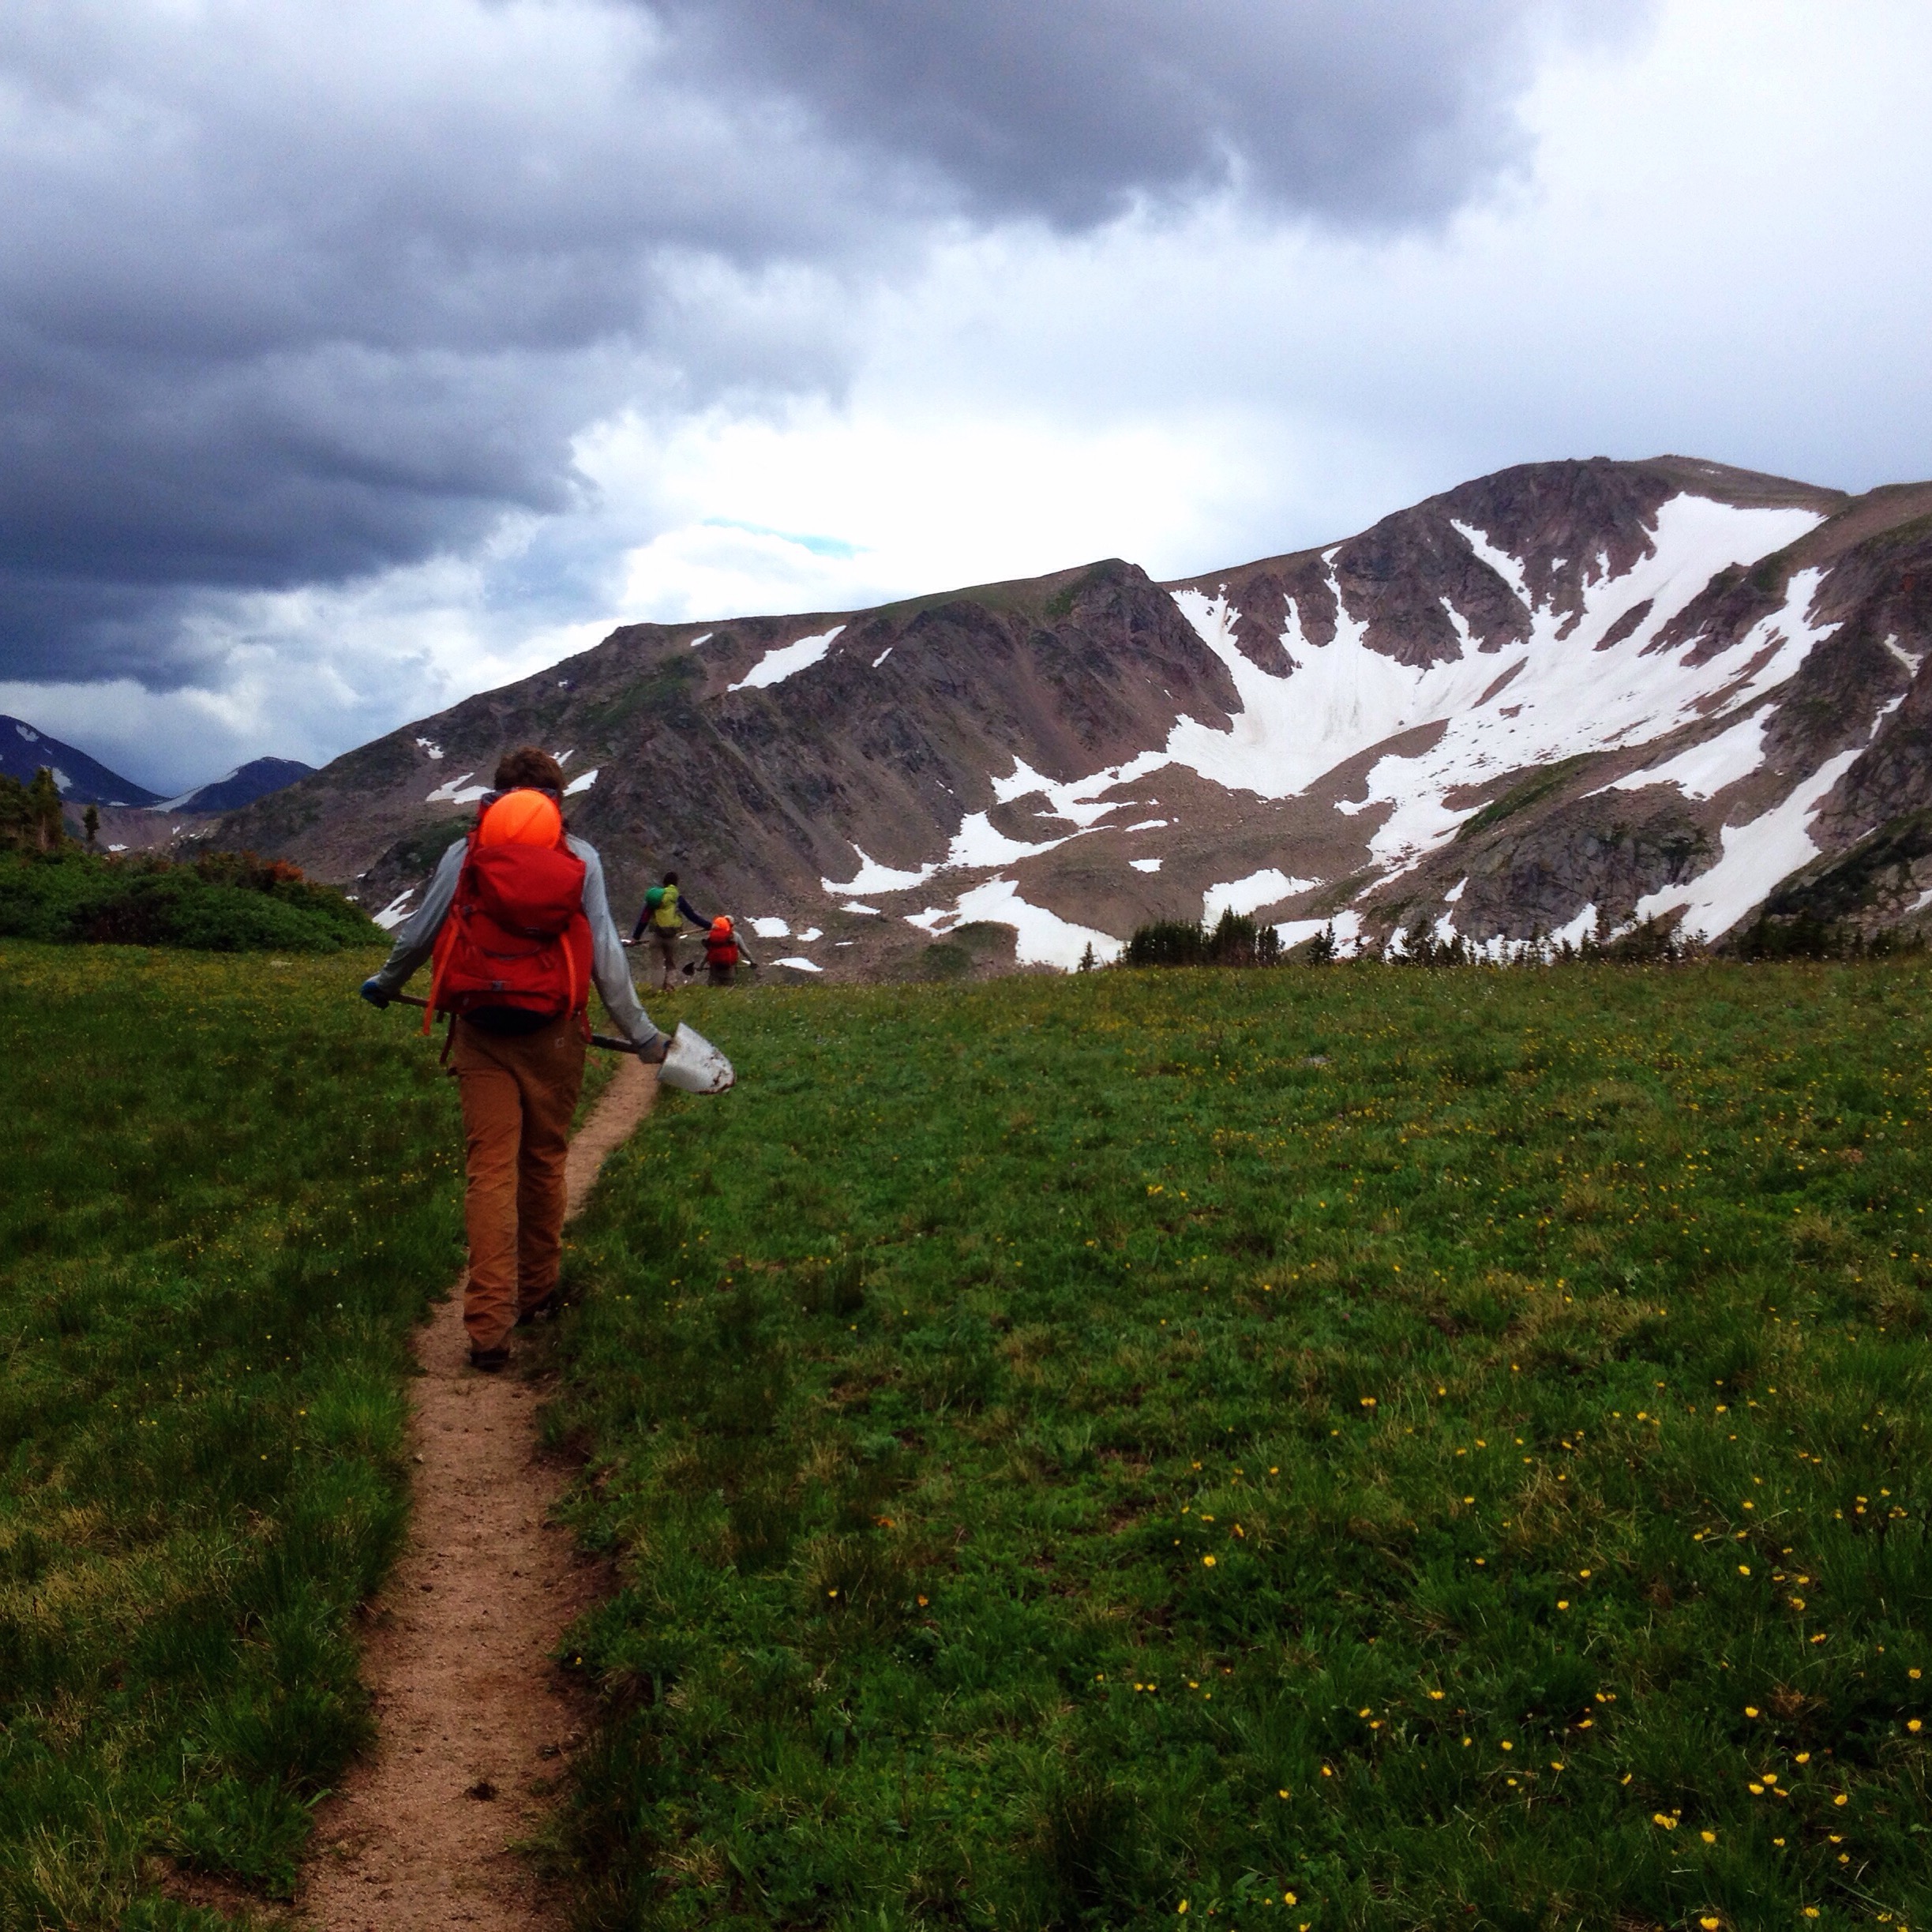 The crew hiking off of Grassy Pass as ominous clouds roll in